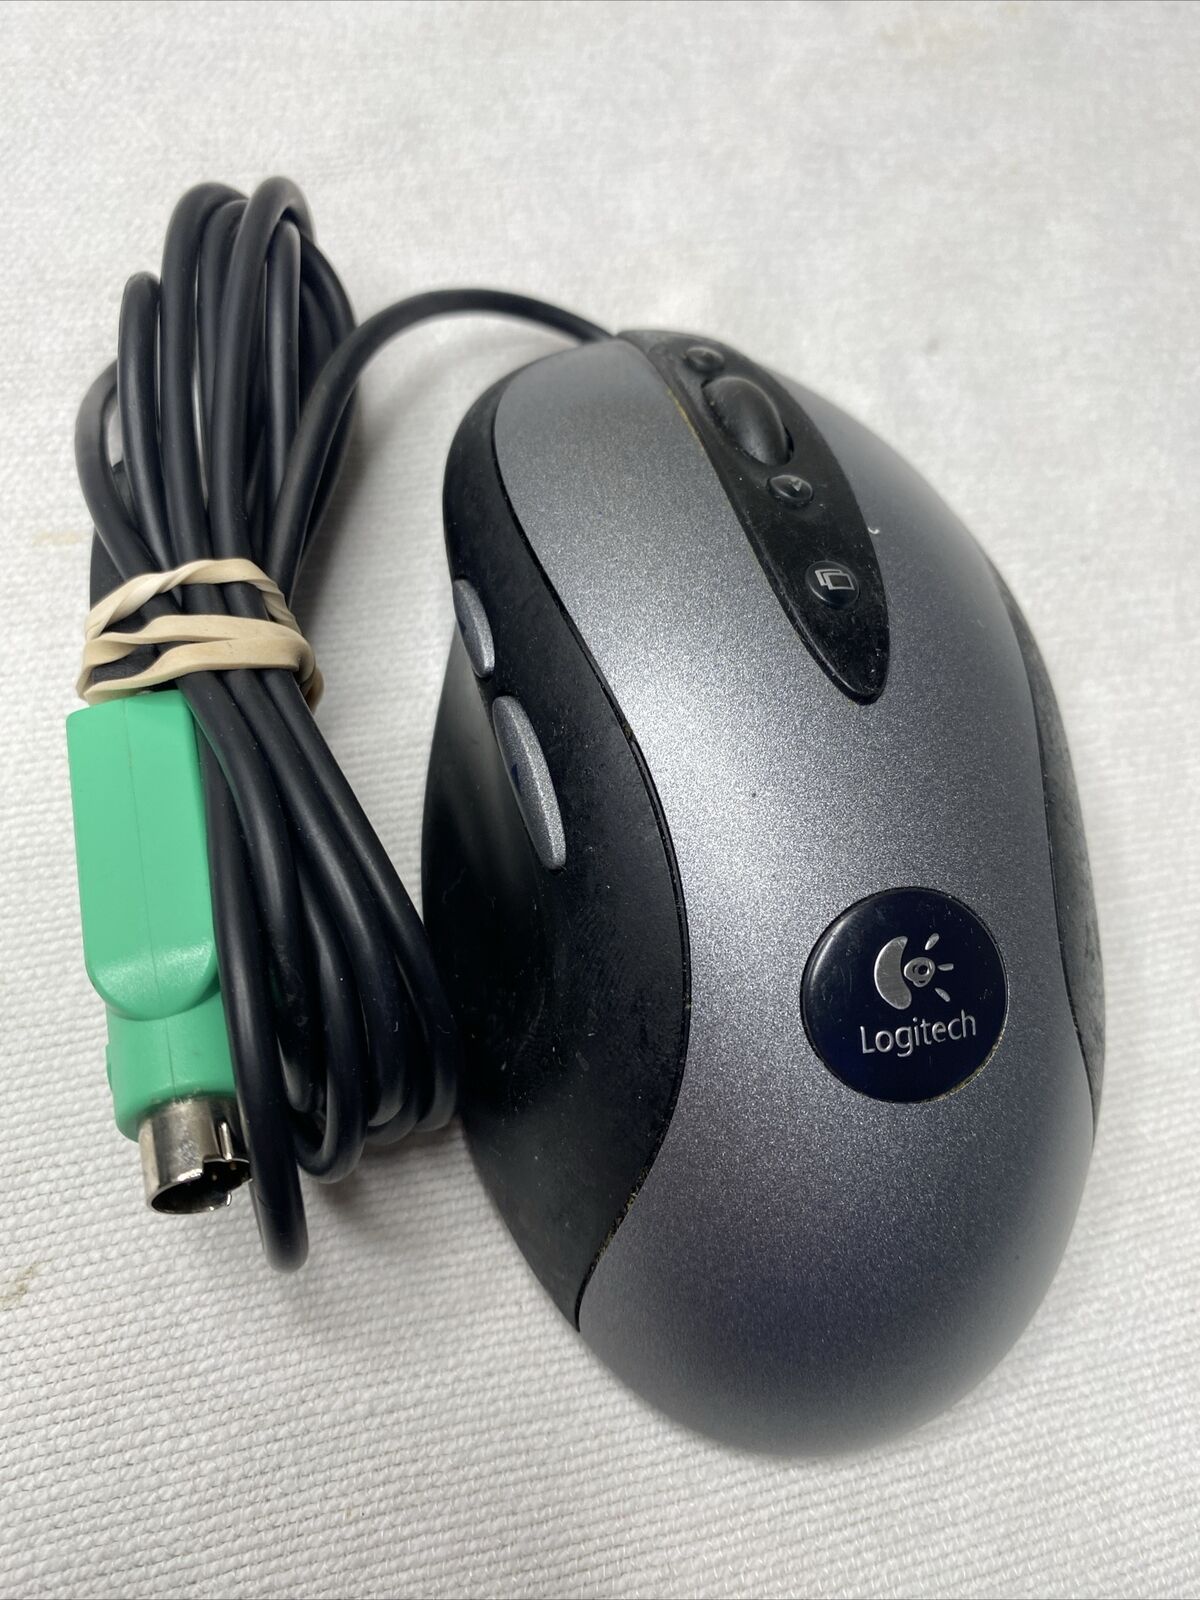 Logitech MX500 Optical Gaming Mouse Wired USB -READ DETAILS